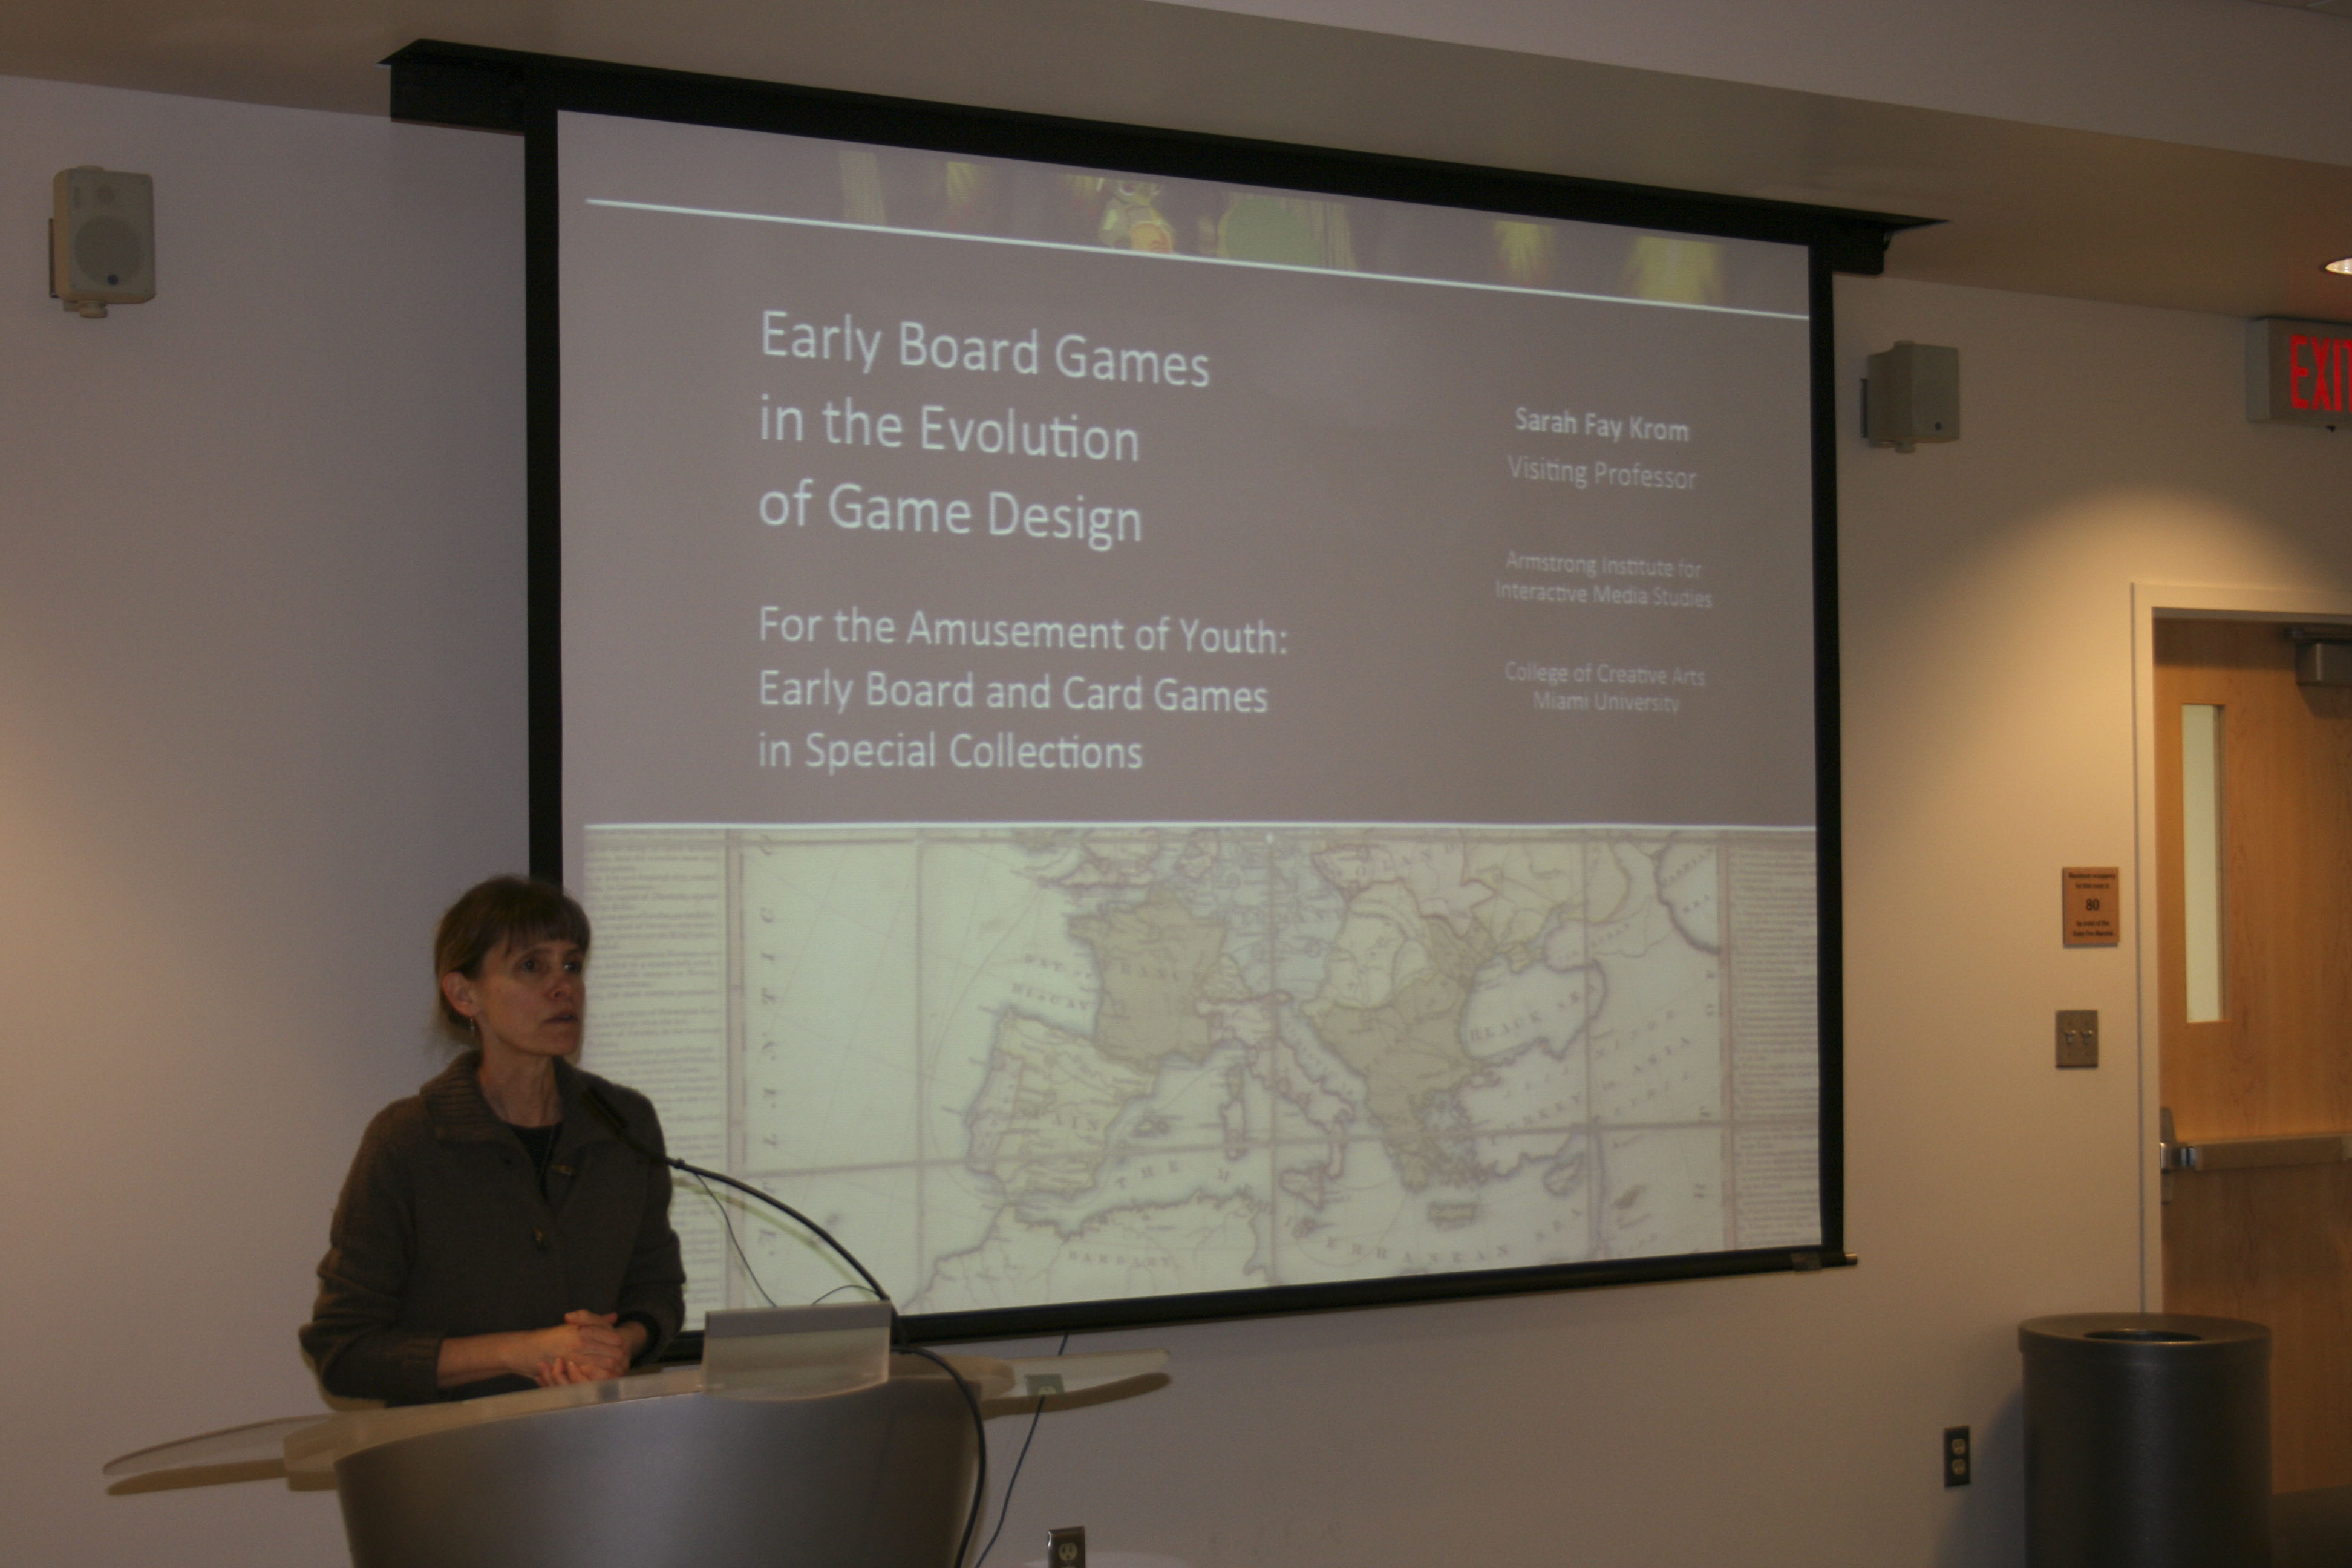 Dr. Krom speaking about the evolution of games